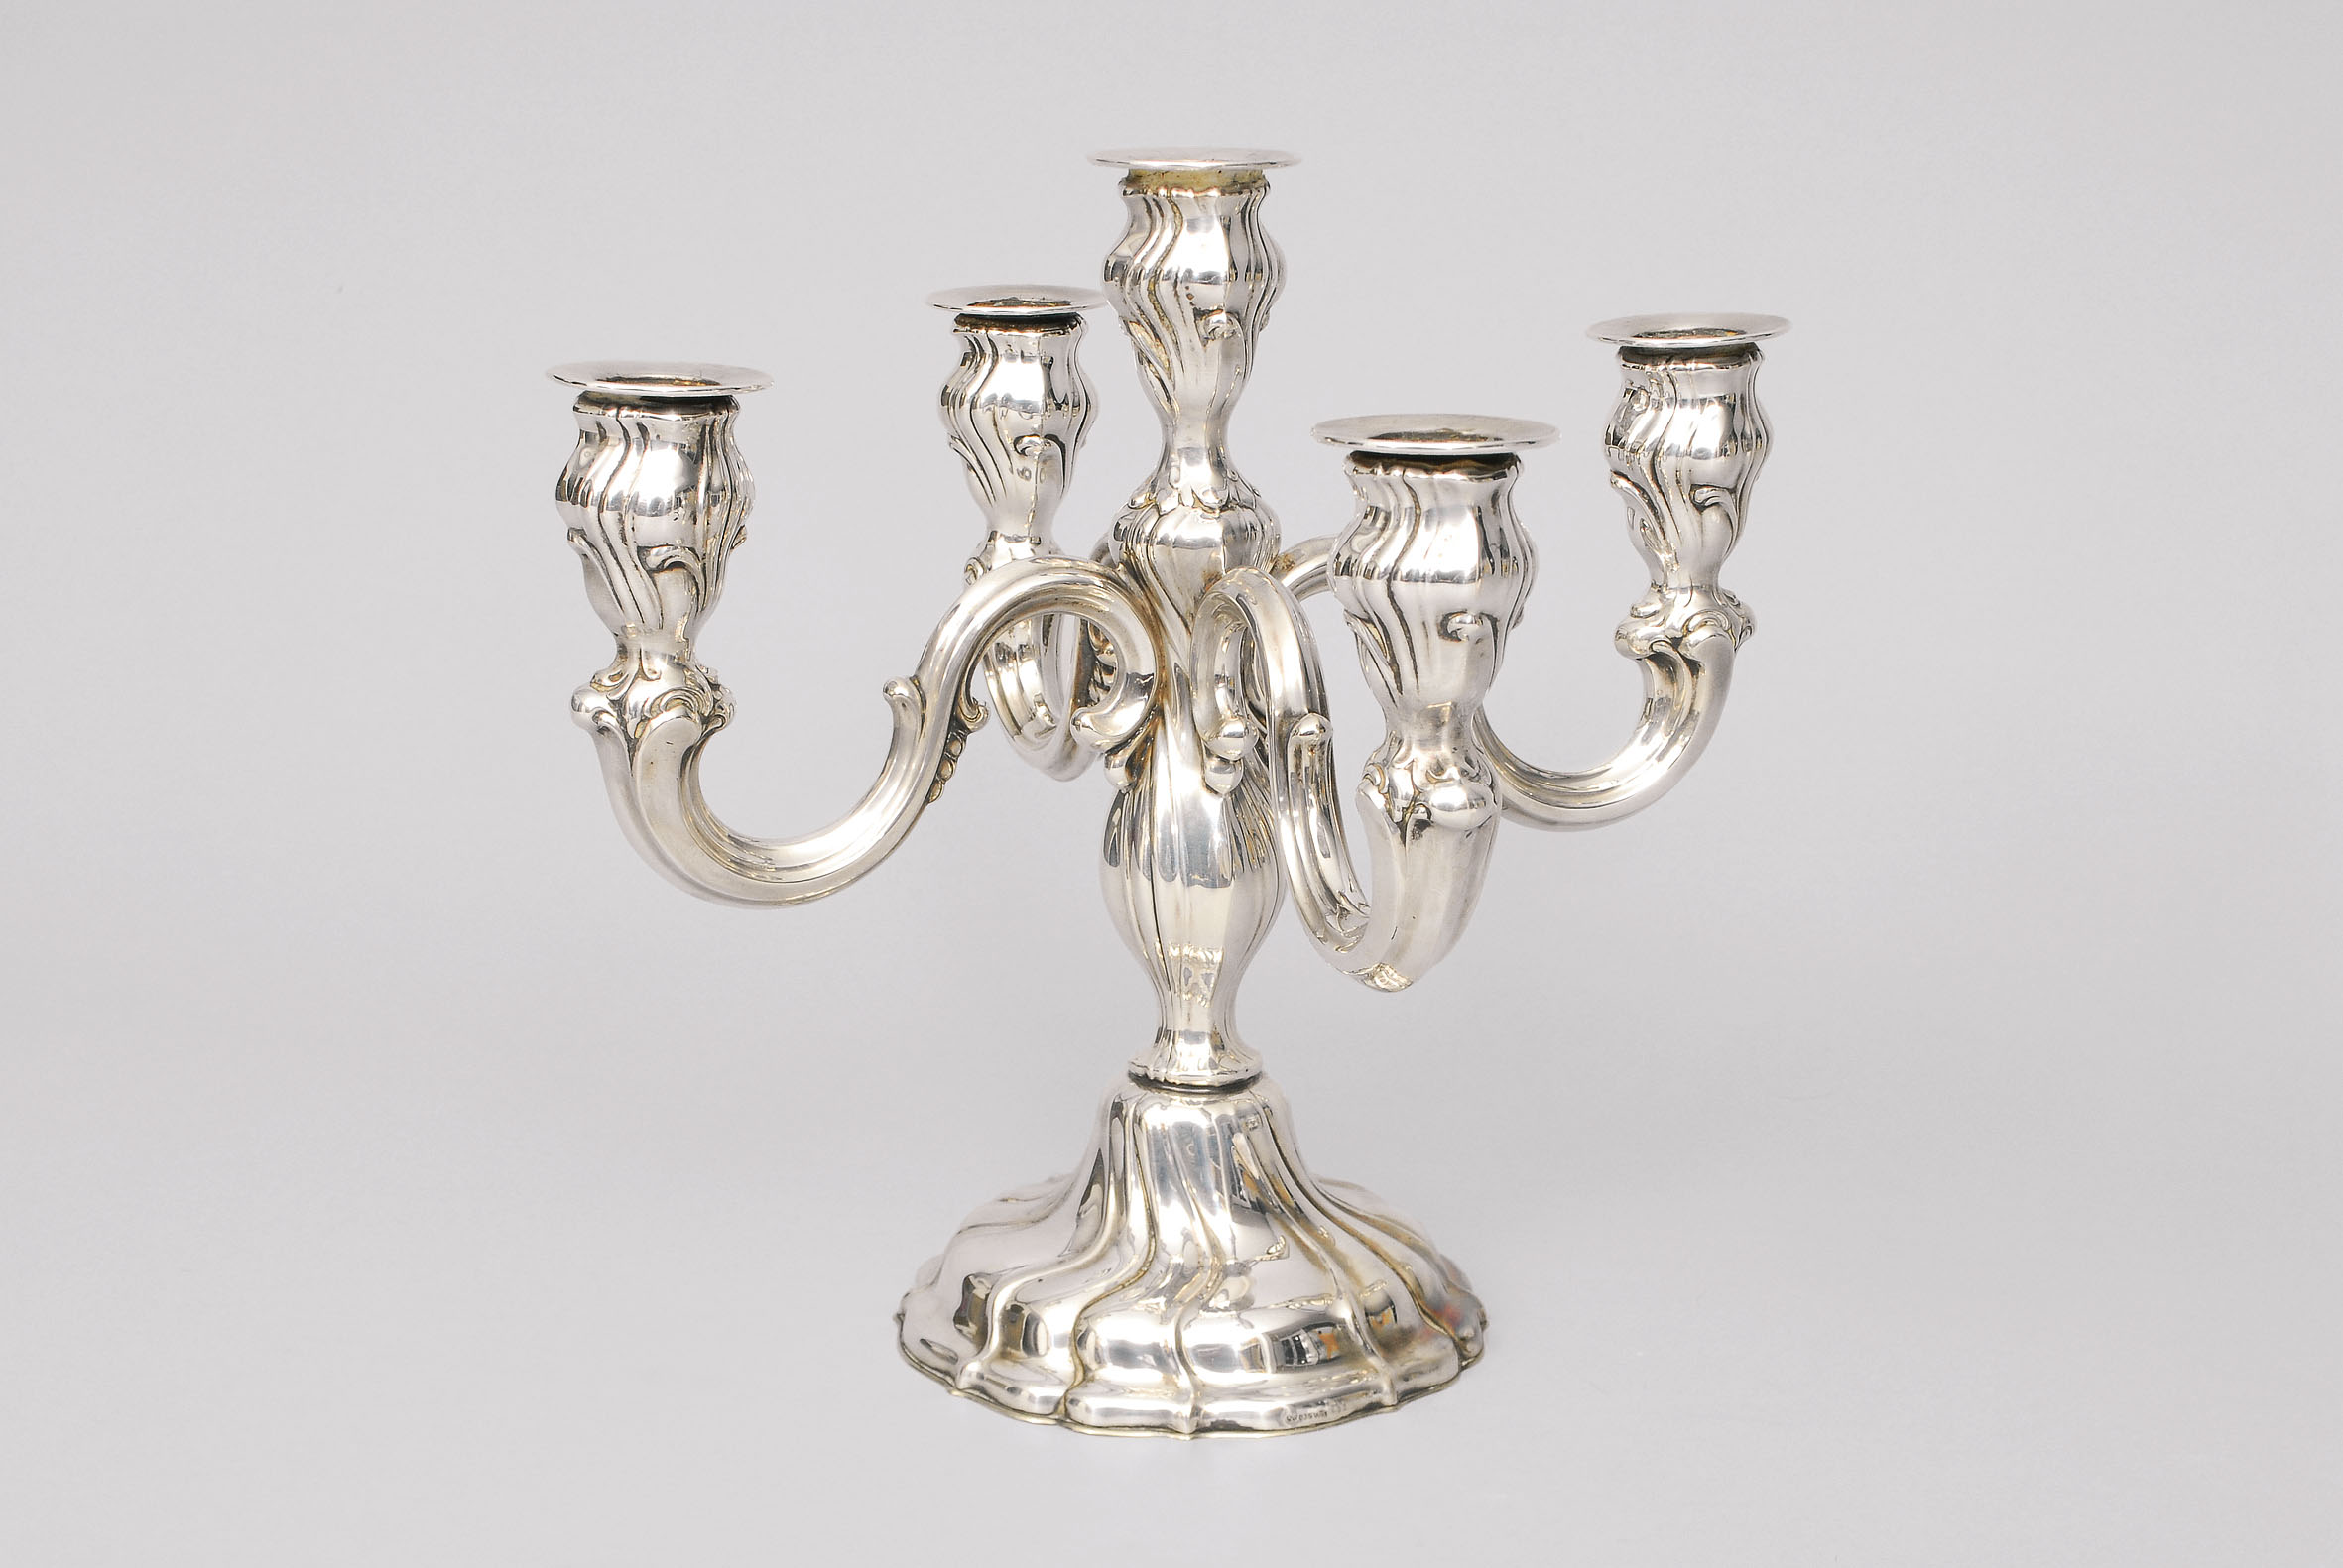 A candle holder in the style of Chippendale